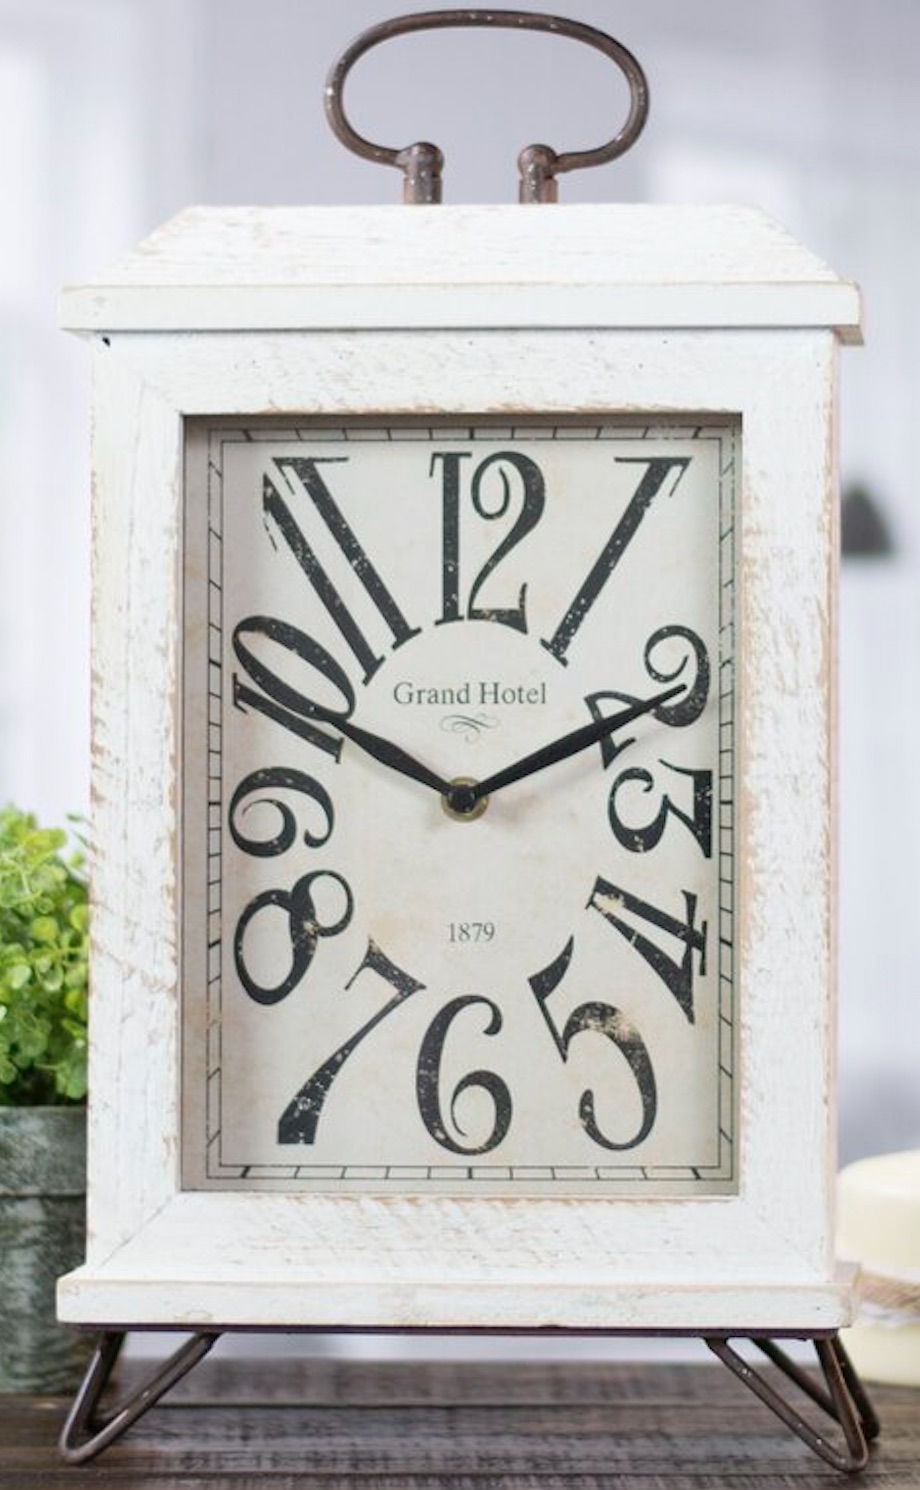 Clocks with Vintage Style Wooden Table Clock Pin #Clocks #MantleClocks #Timepiece #TableTopDecor #Decor